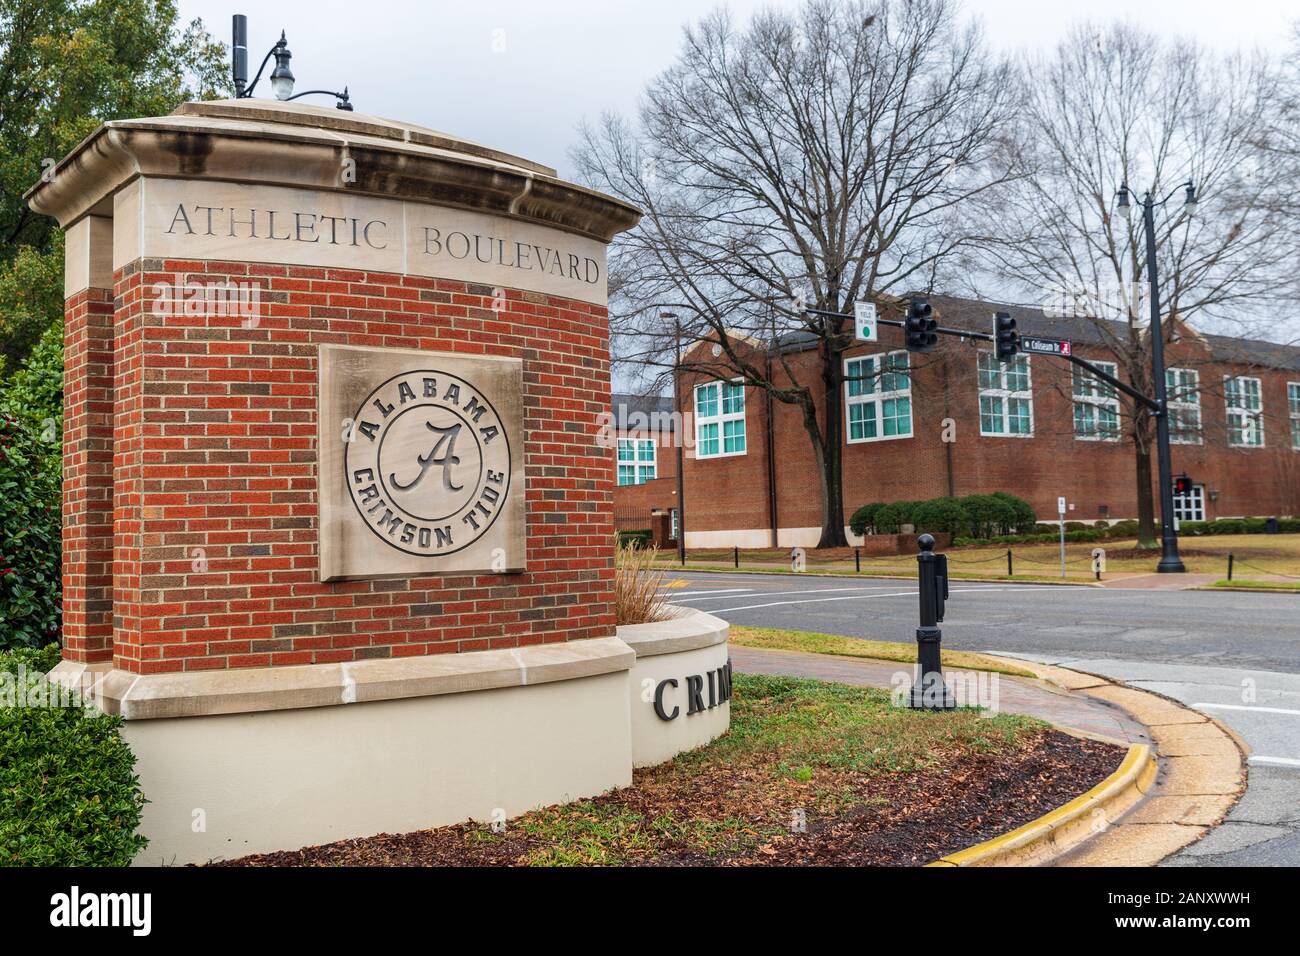 Tuscaloosa, AL / USA - December 29, 2019: Mal M. Moore Athletic Boulevard Entrance sign on the Campus of the University of Alabama Stock Photo